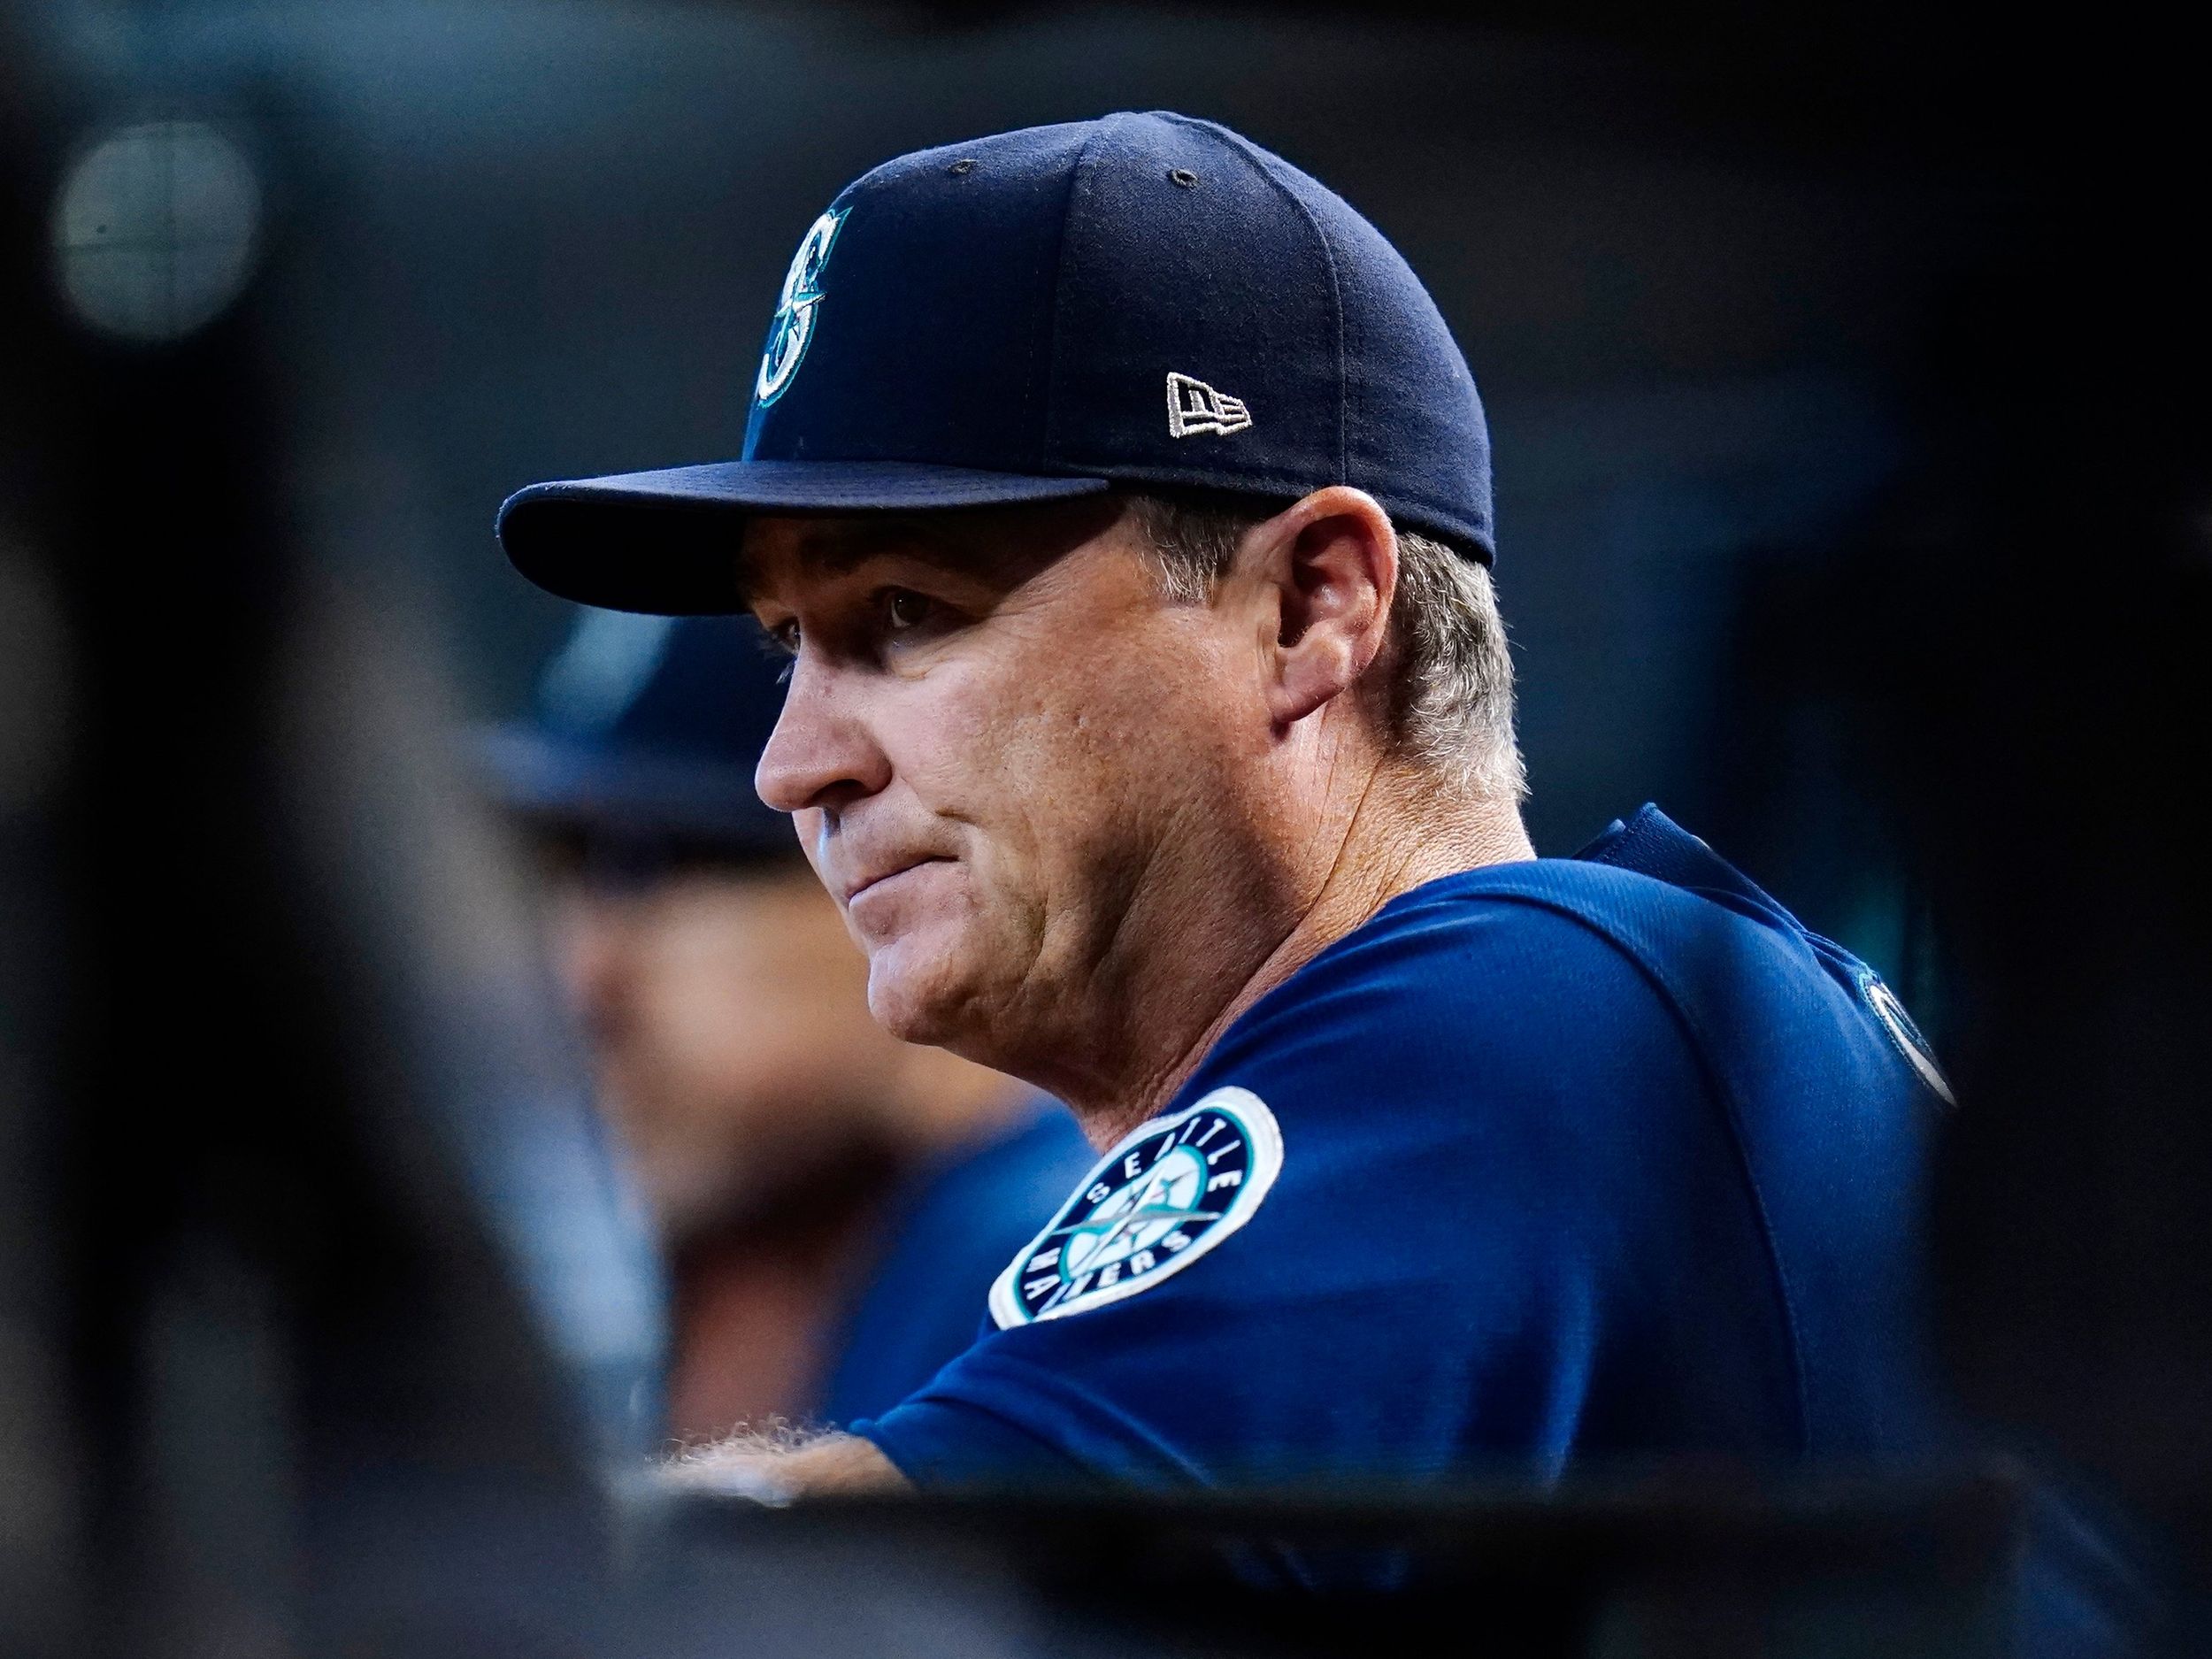 The story of Mariners manager Scott Servais' career and life is